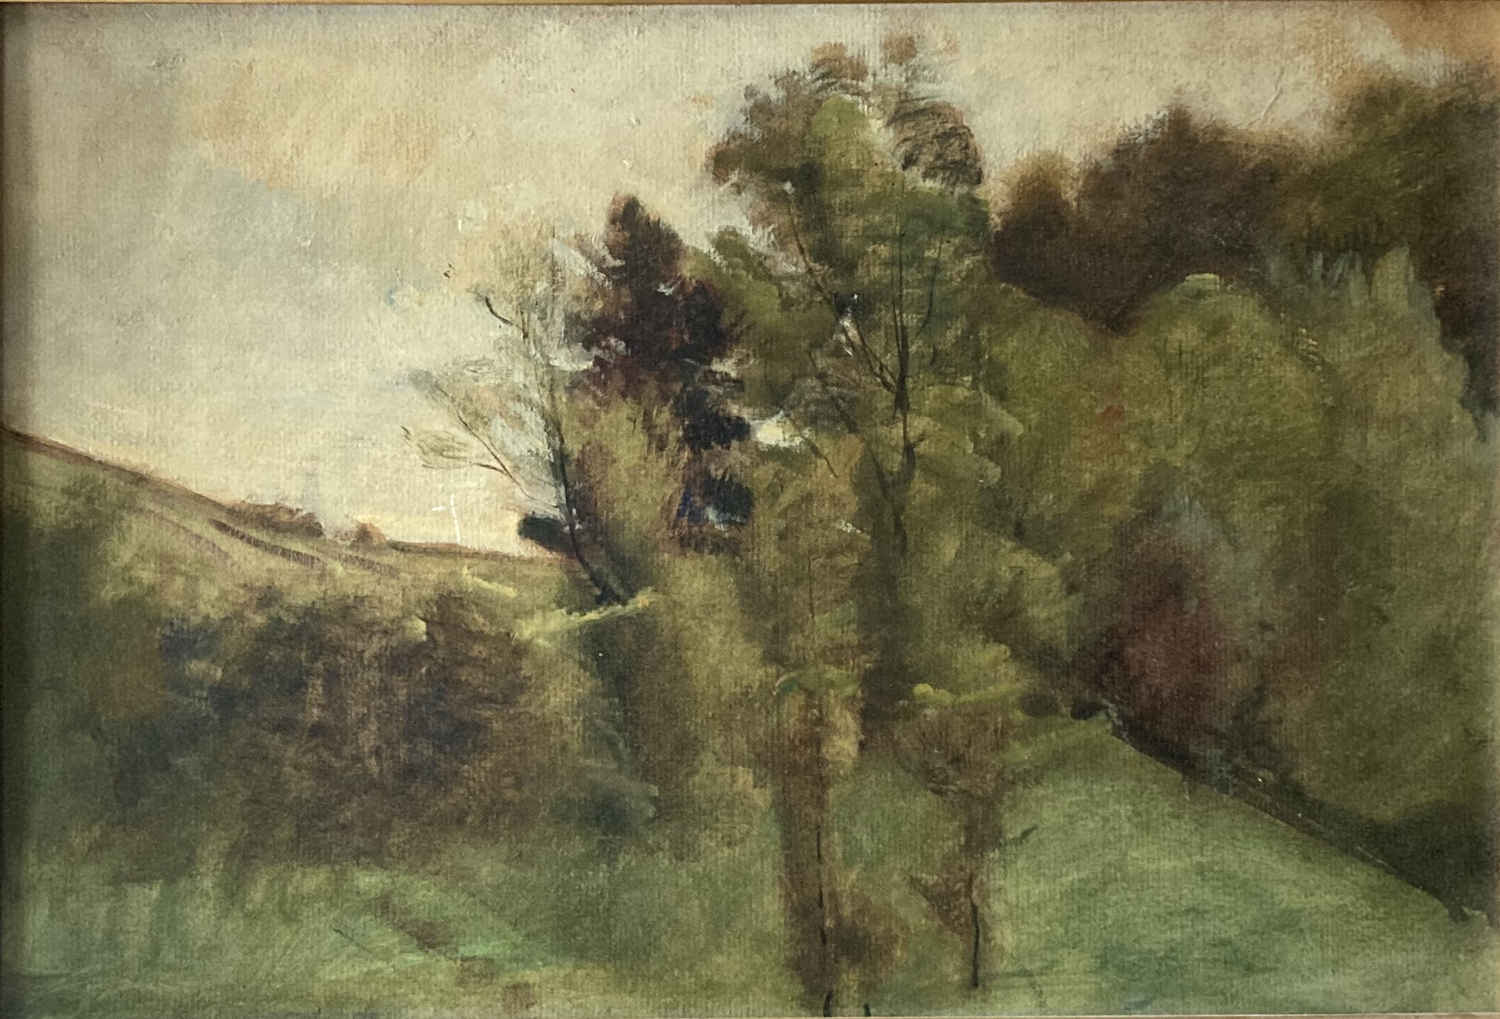 Oil painting by the Swiss landscape painter Barthélemy Menn, main representative of the Geneva School and important painter of the paysage intime style, predecessor of Impressionism; landscape section with trees at the edge of the forest.